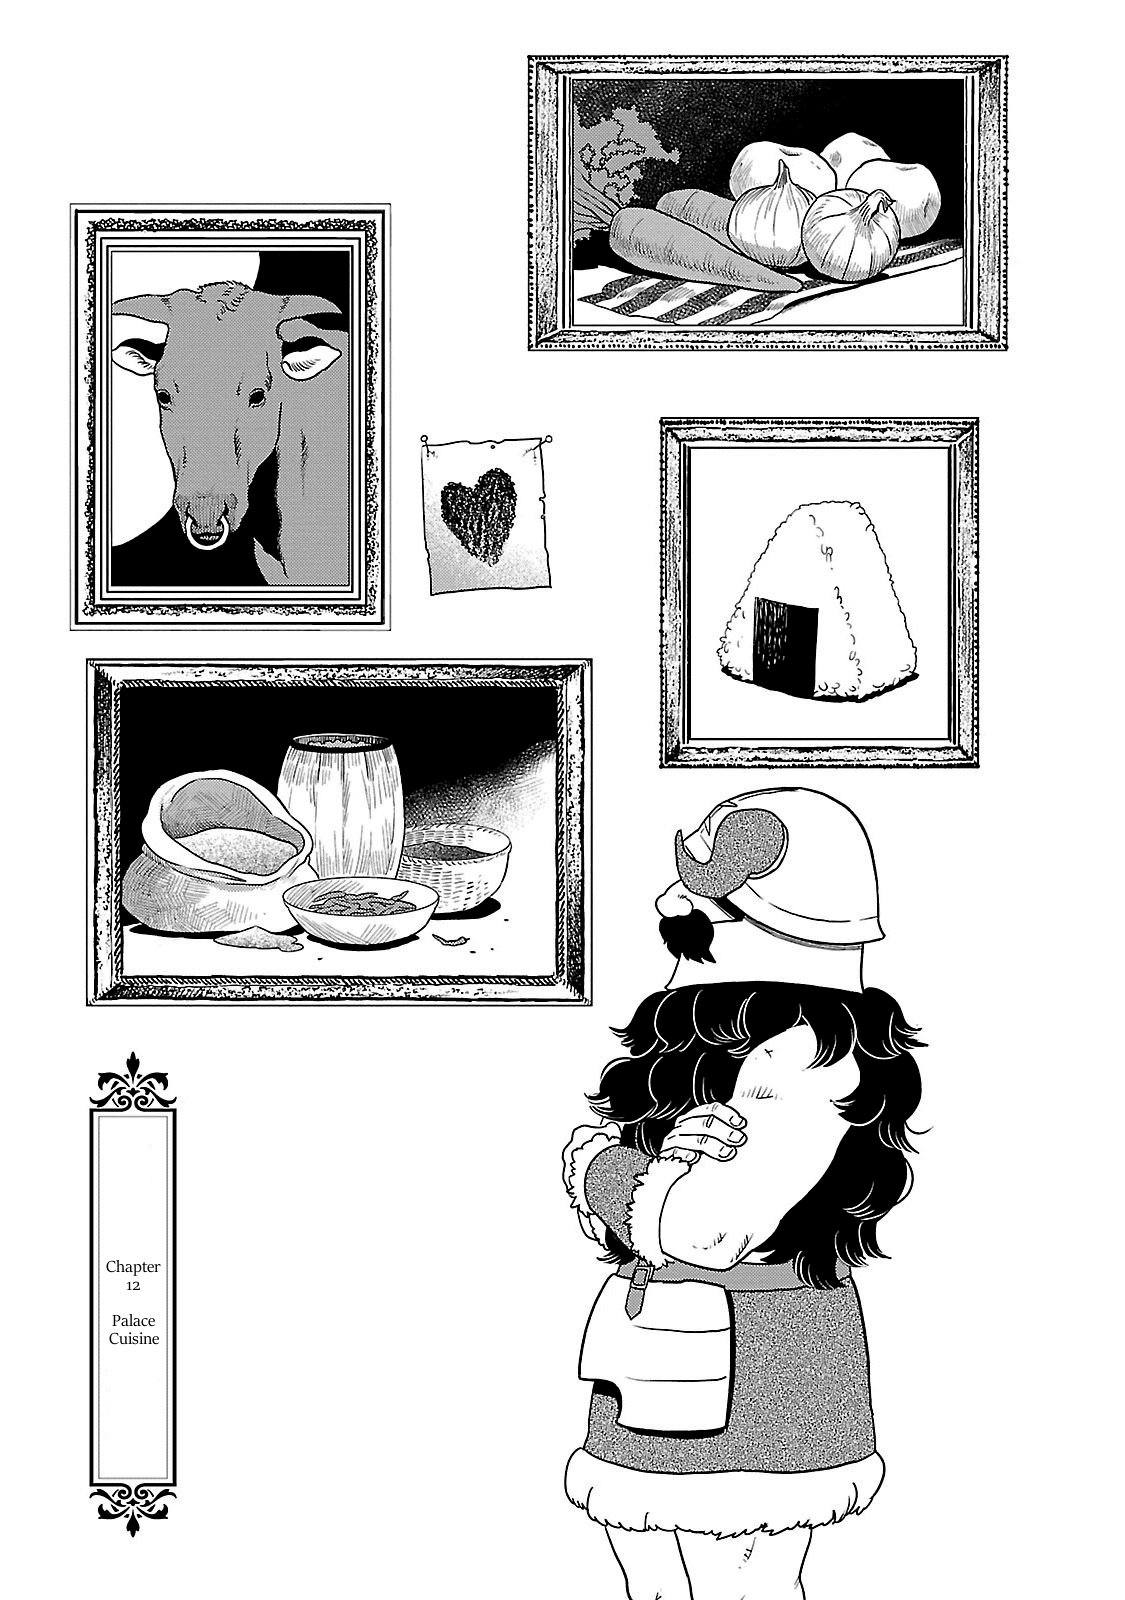 Dungeon Meshi Vol.2-Chapter.12-Palace-Cuisine Image